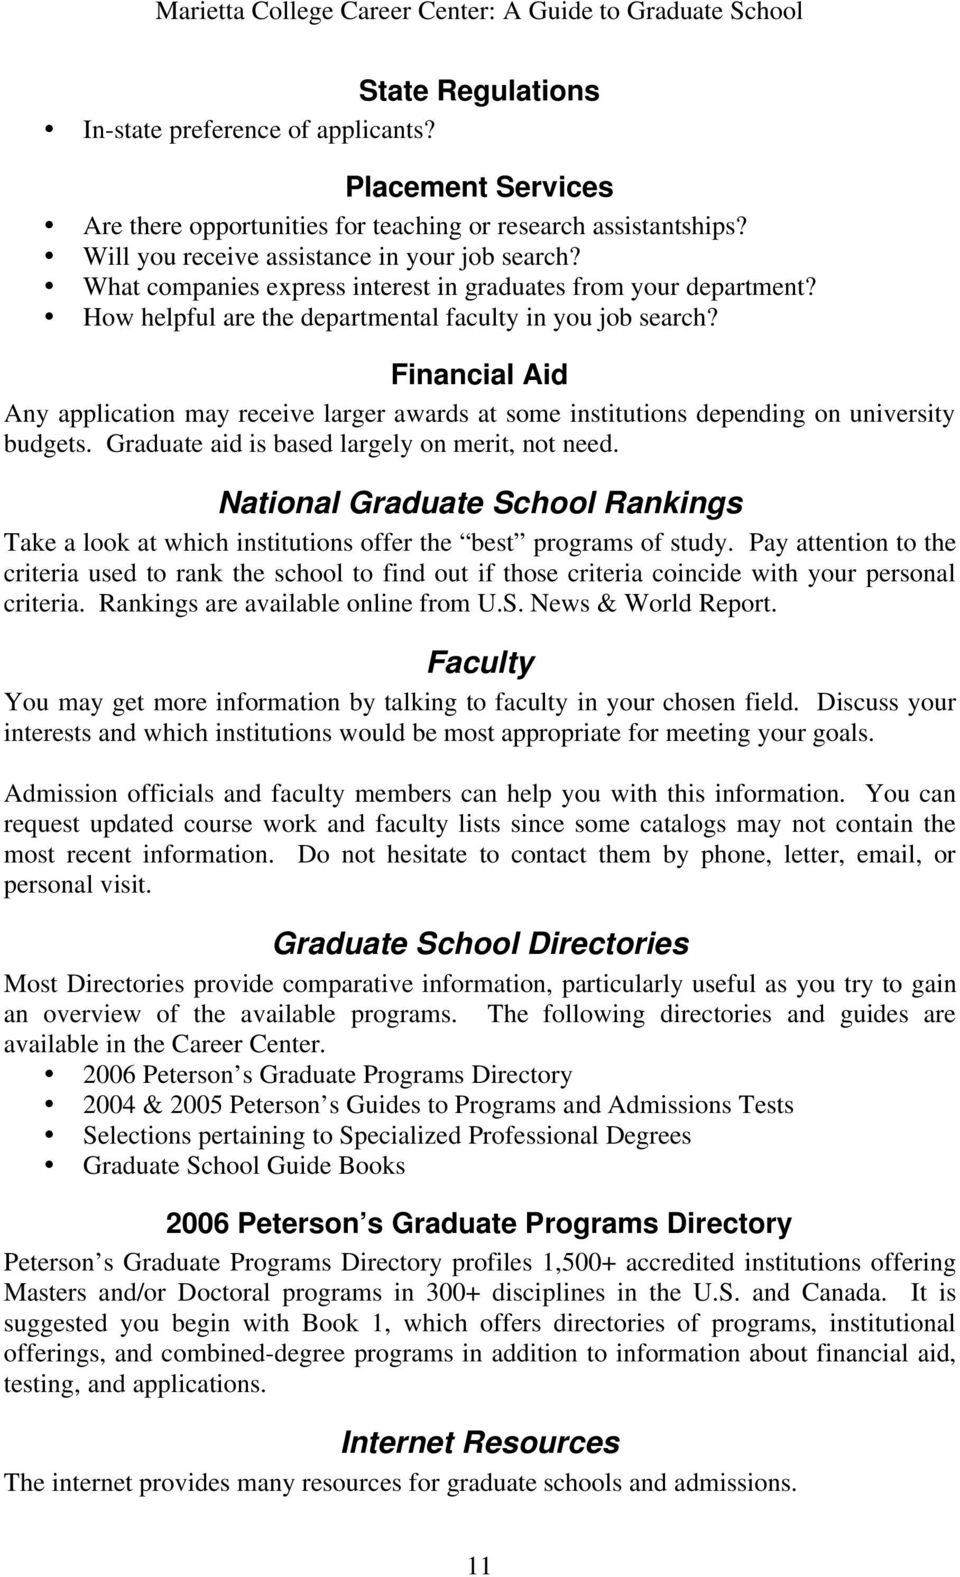 Financial Aid Any application may receive larger awards at some institutions depending on university budgets. Graduate aid is based largely on merit, not need.